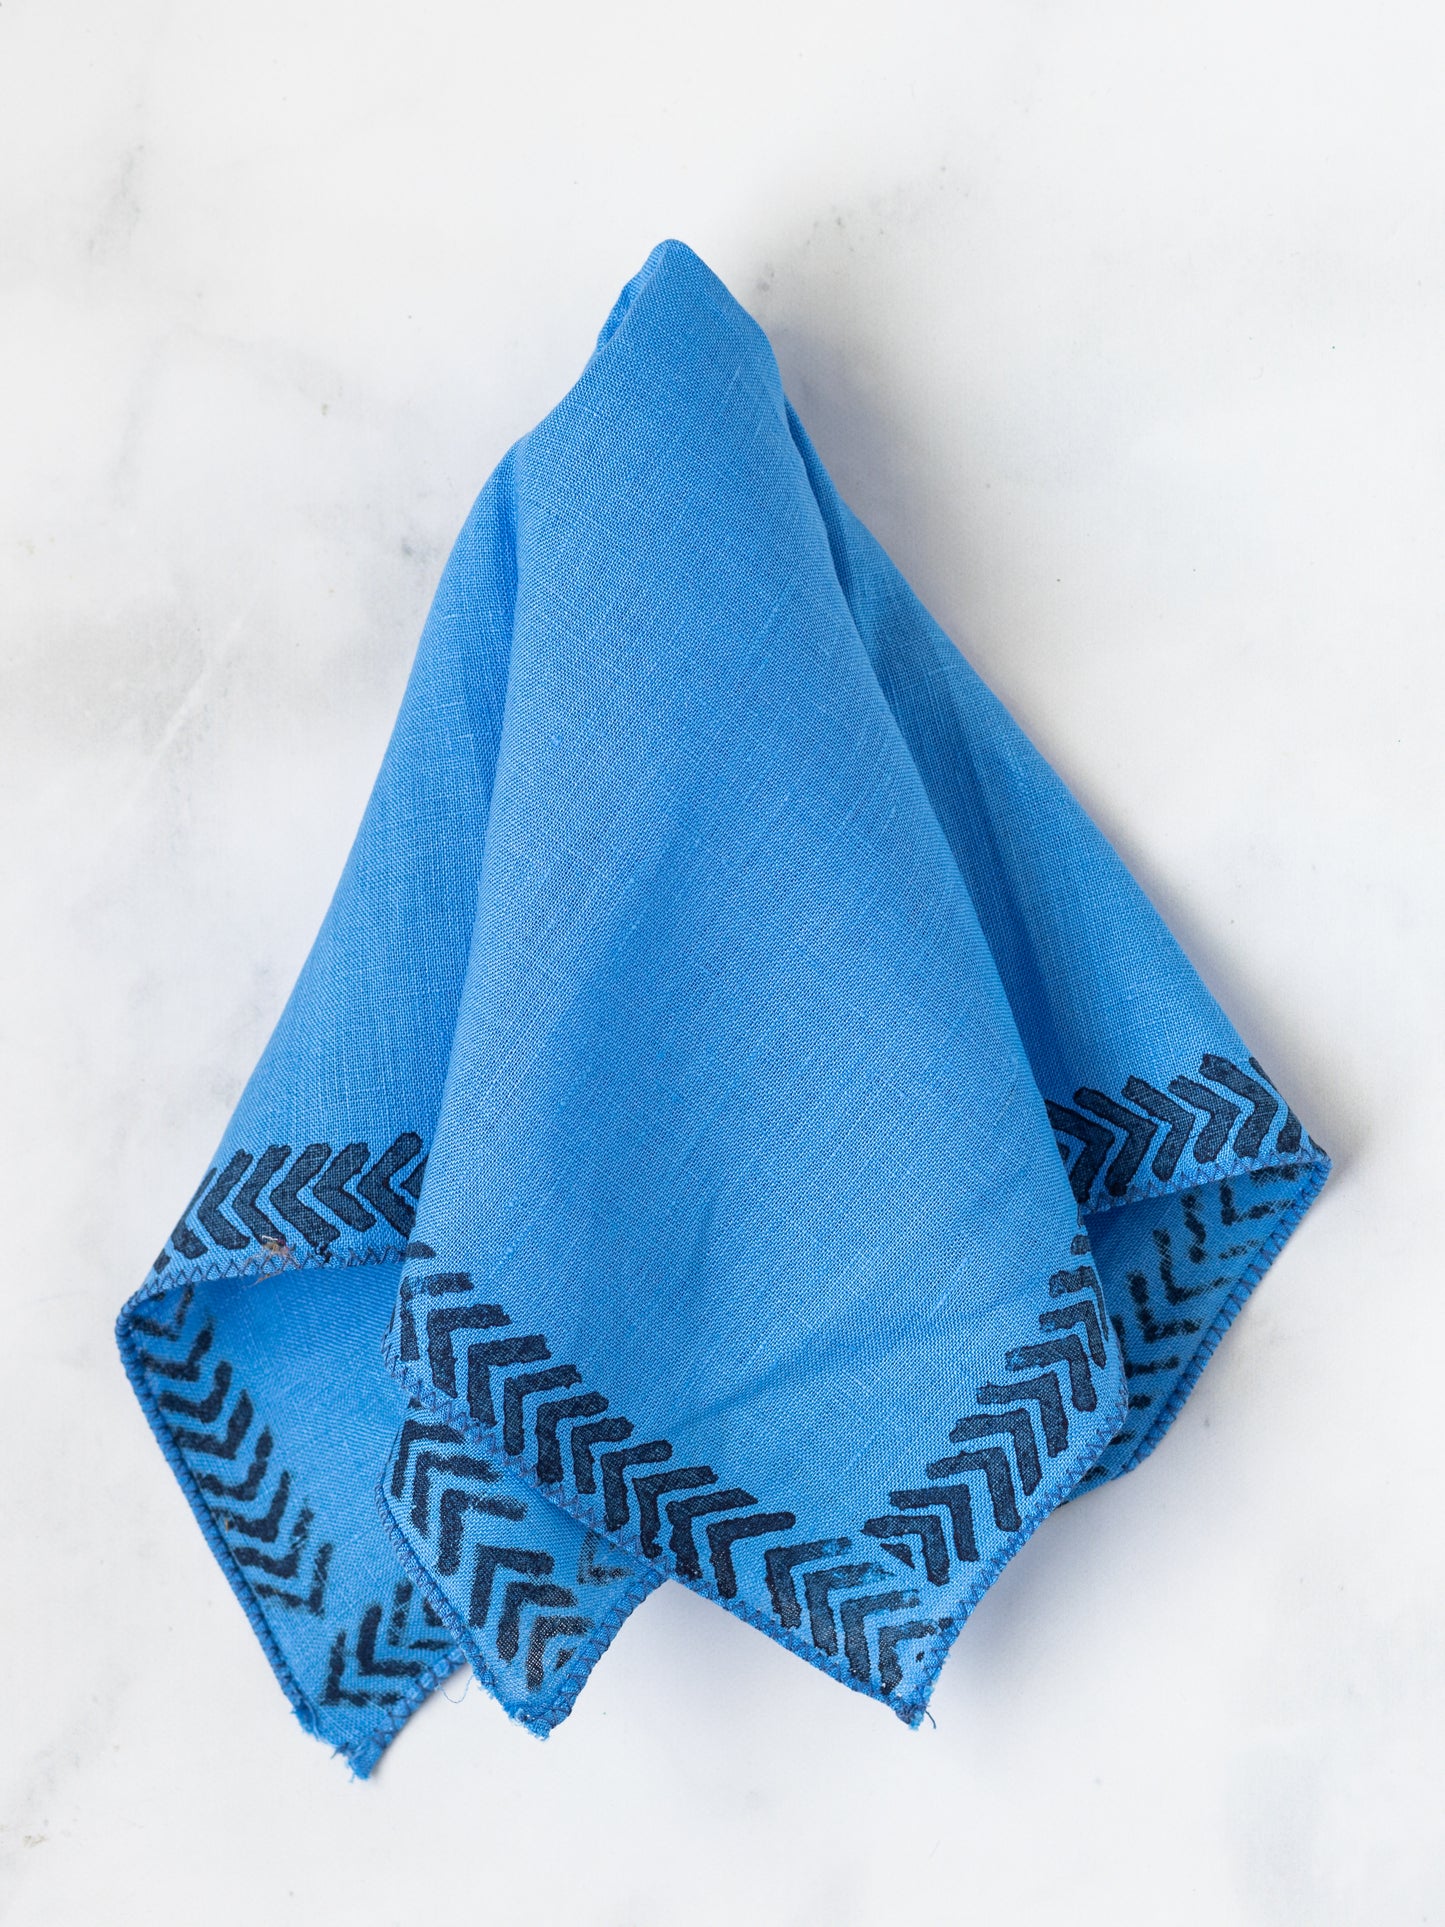 Pocket Square - Blue Linen with Arrows, Navy